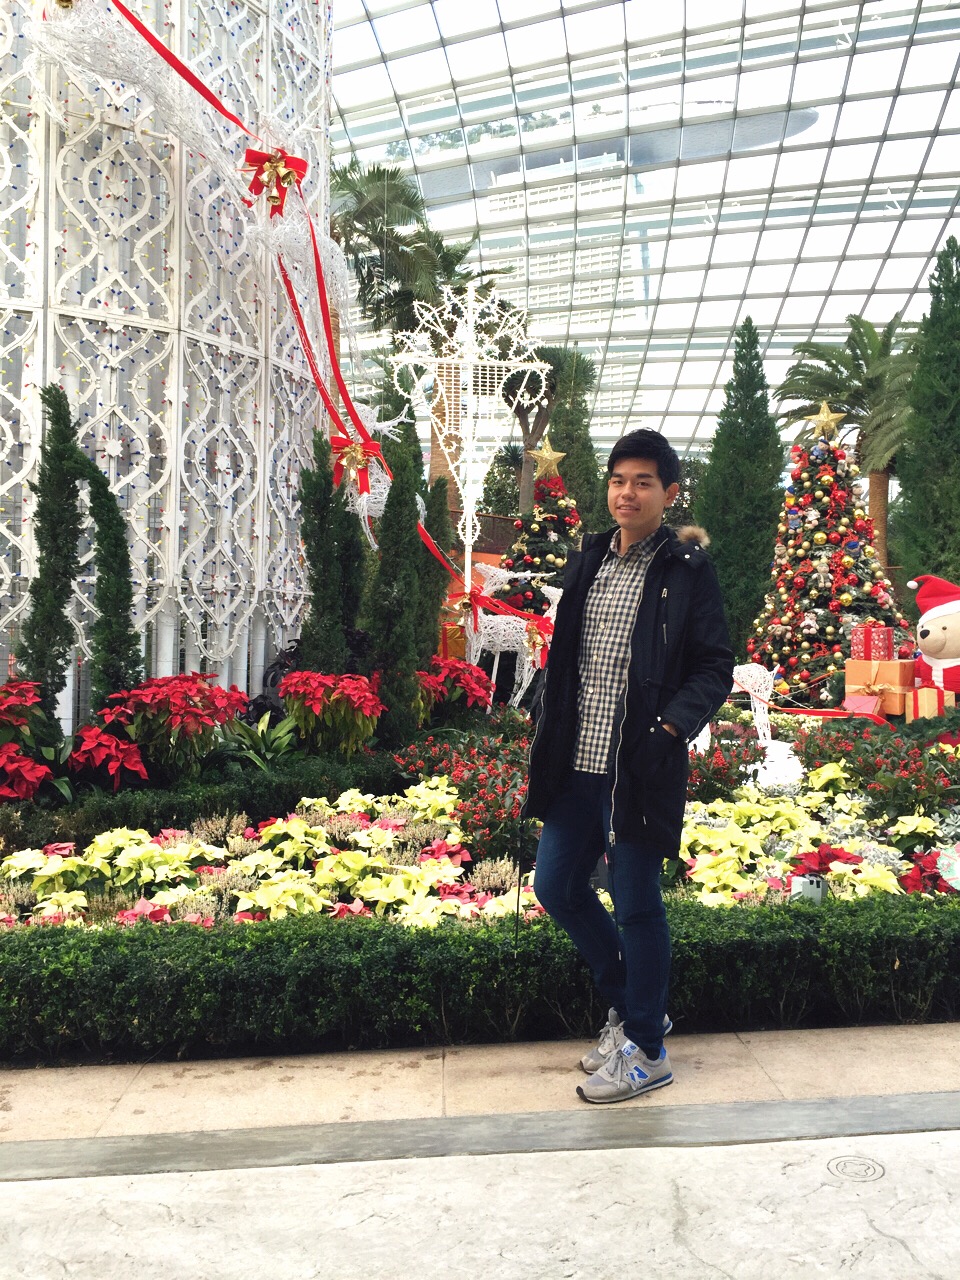 Yuletide in the Flower Dome at Gardens by the Bay